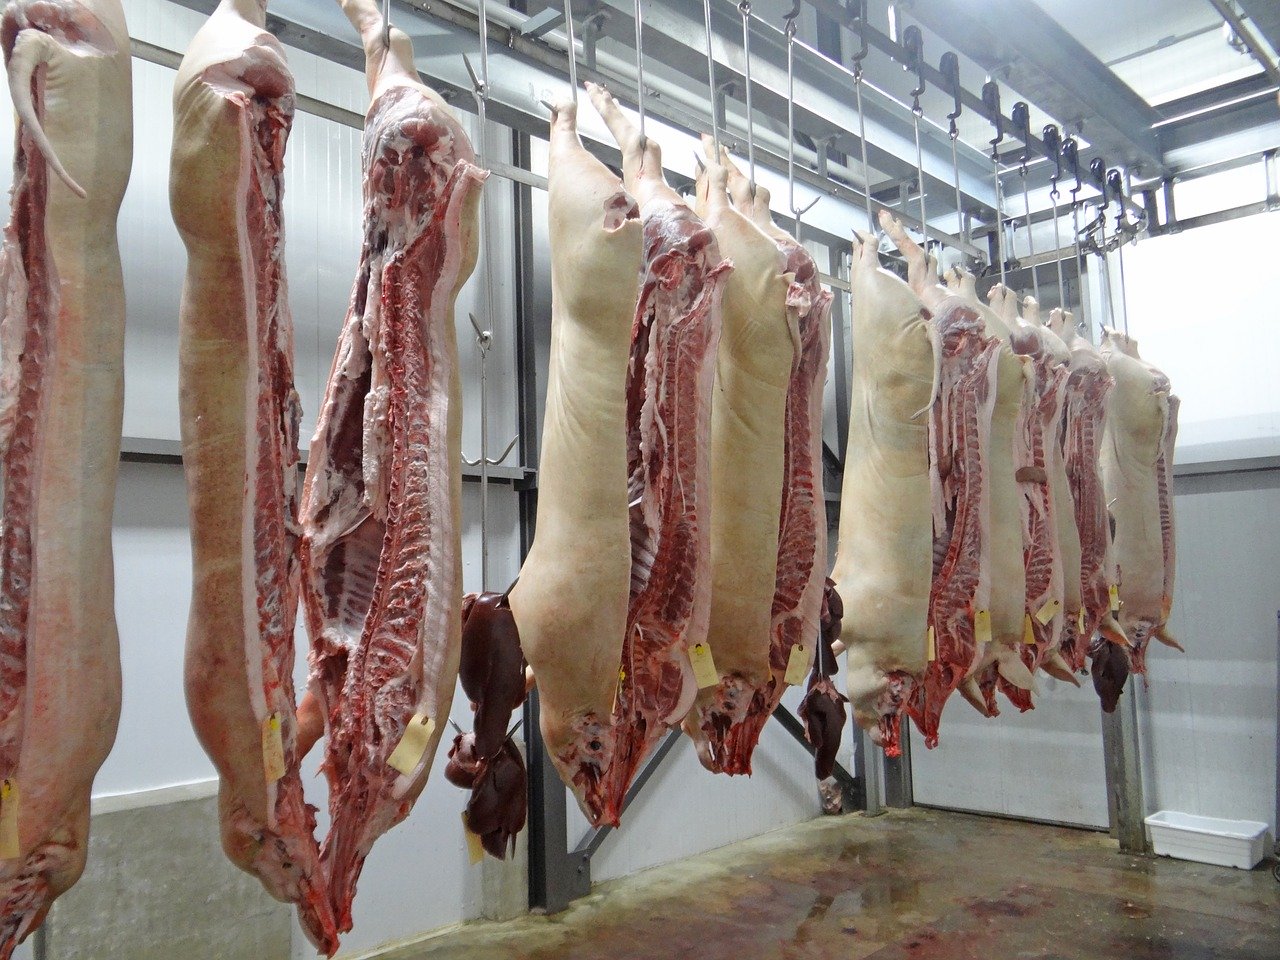 Melbourne’s Meat Industry COVID-19 Cluster Shows How Dangerous Abattoirs Are